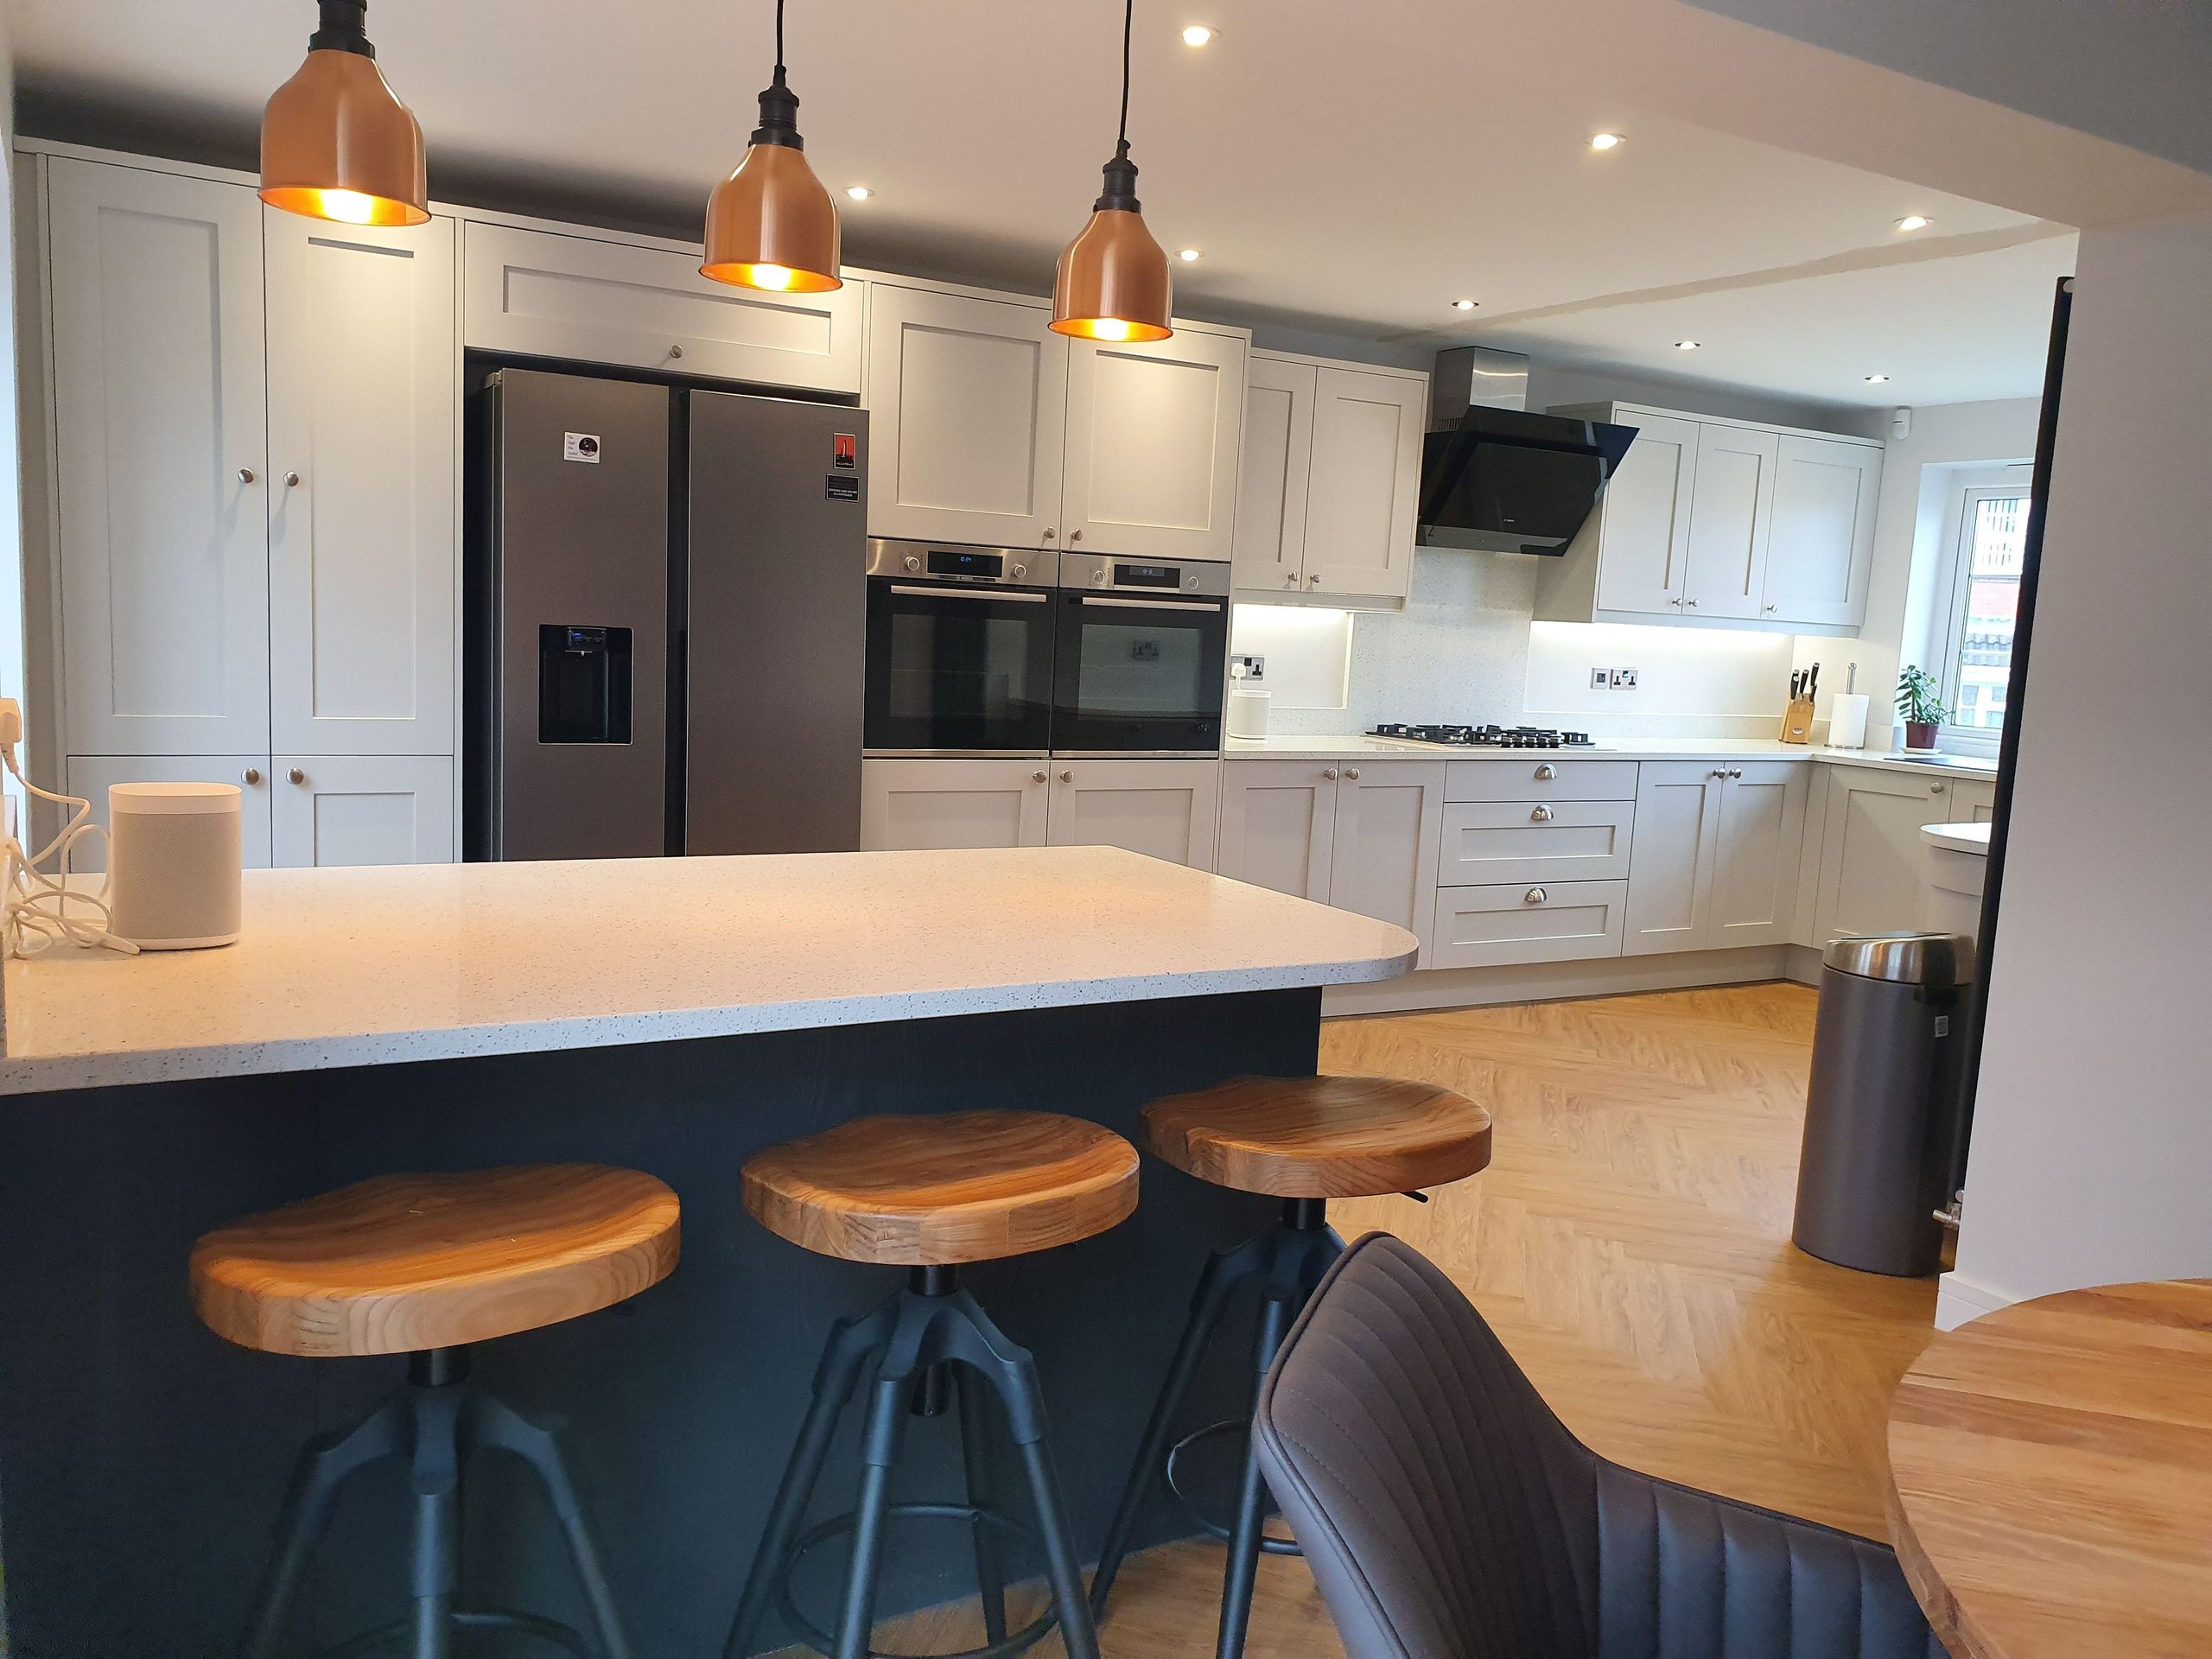 Take a Look at Our Past Kitchen Installations | The Rigid Kitchen Company